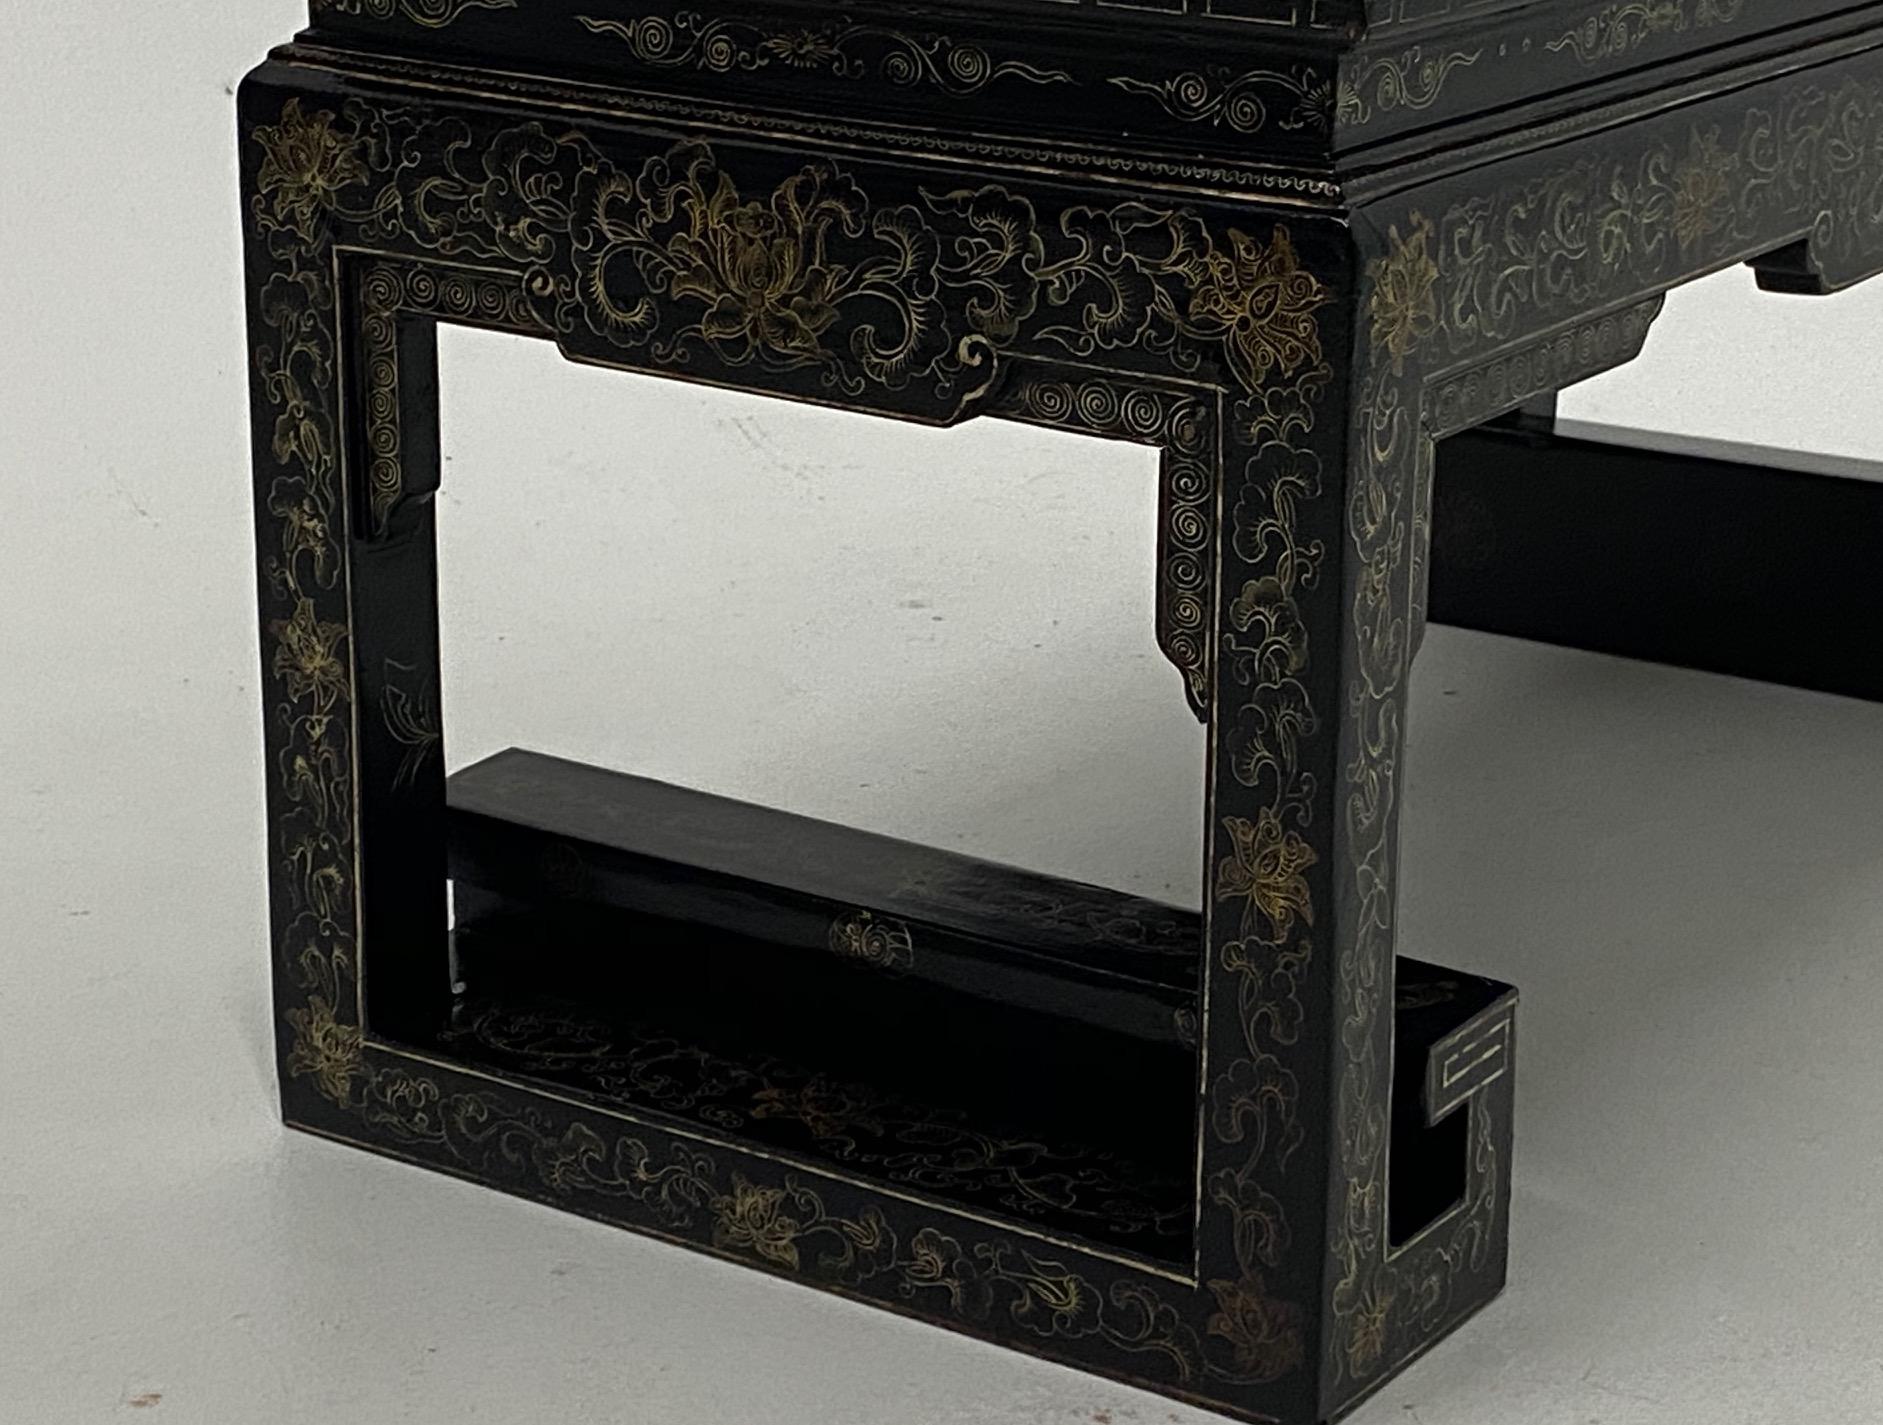 Beautifully Shaped and Decorated Chinese Lacquer Table For Sale 1